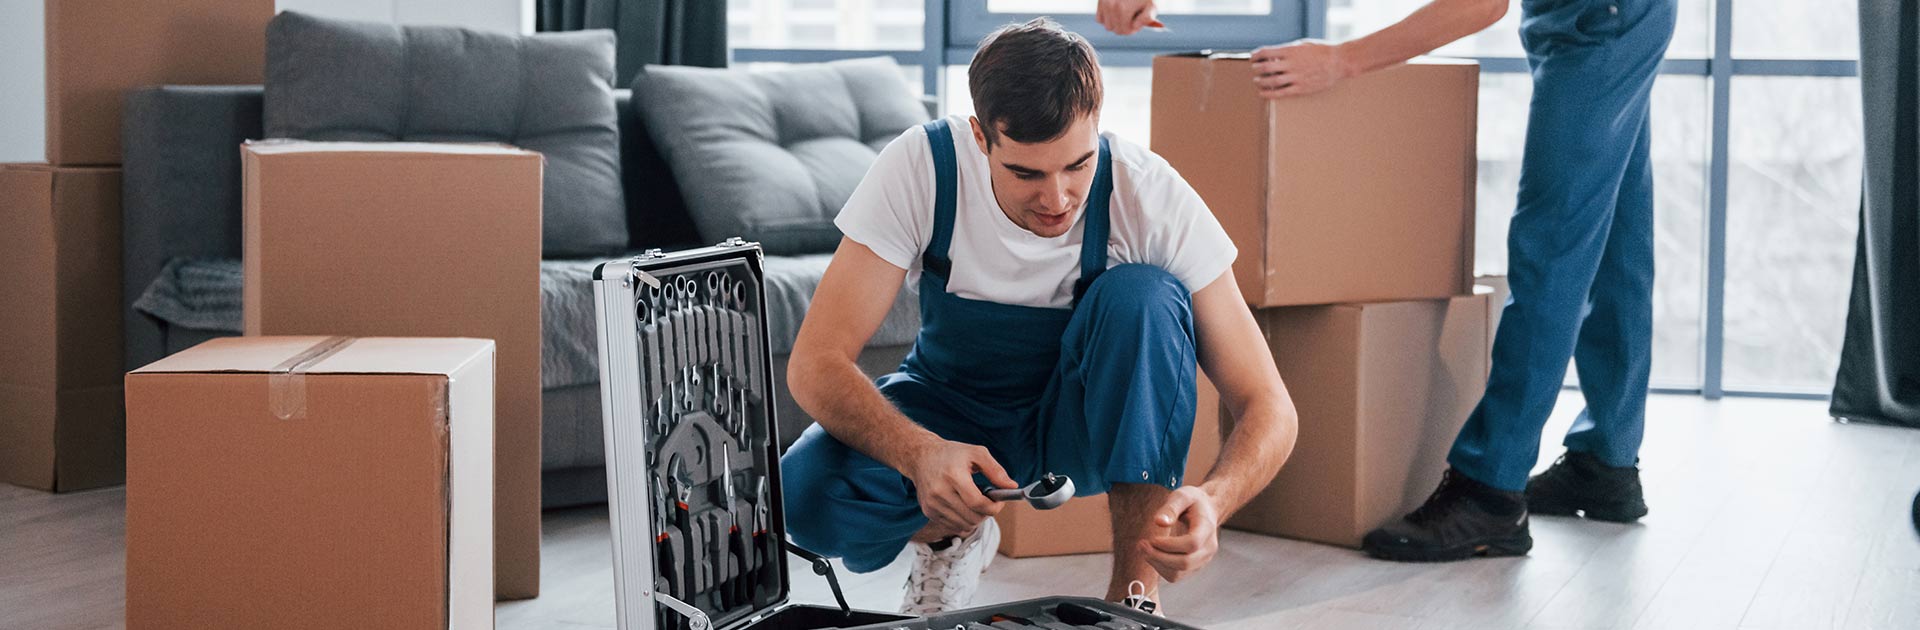 Best Movers and Packers in Umm Suqeim Dubai